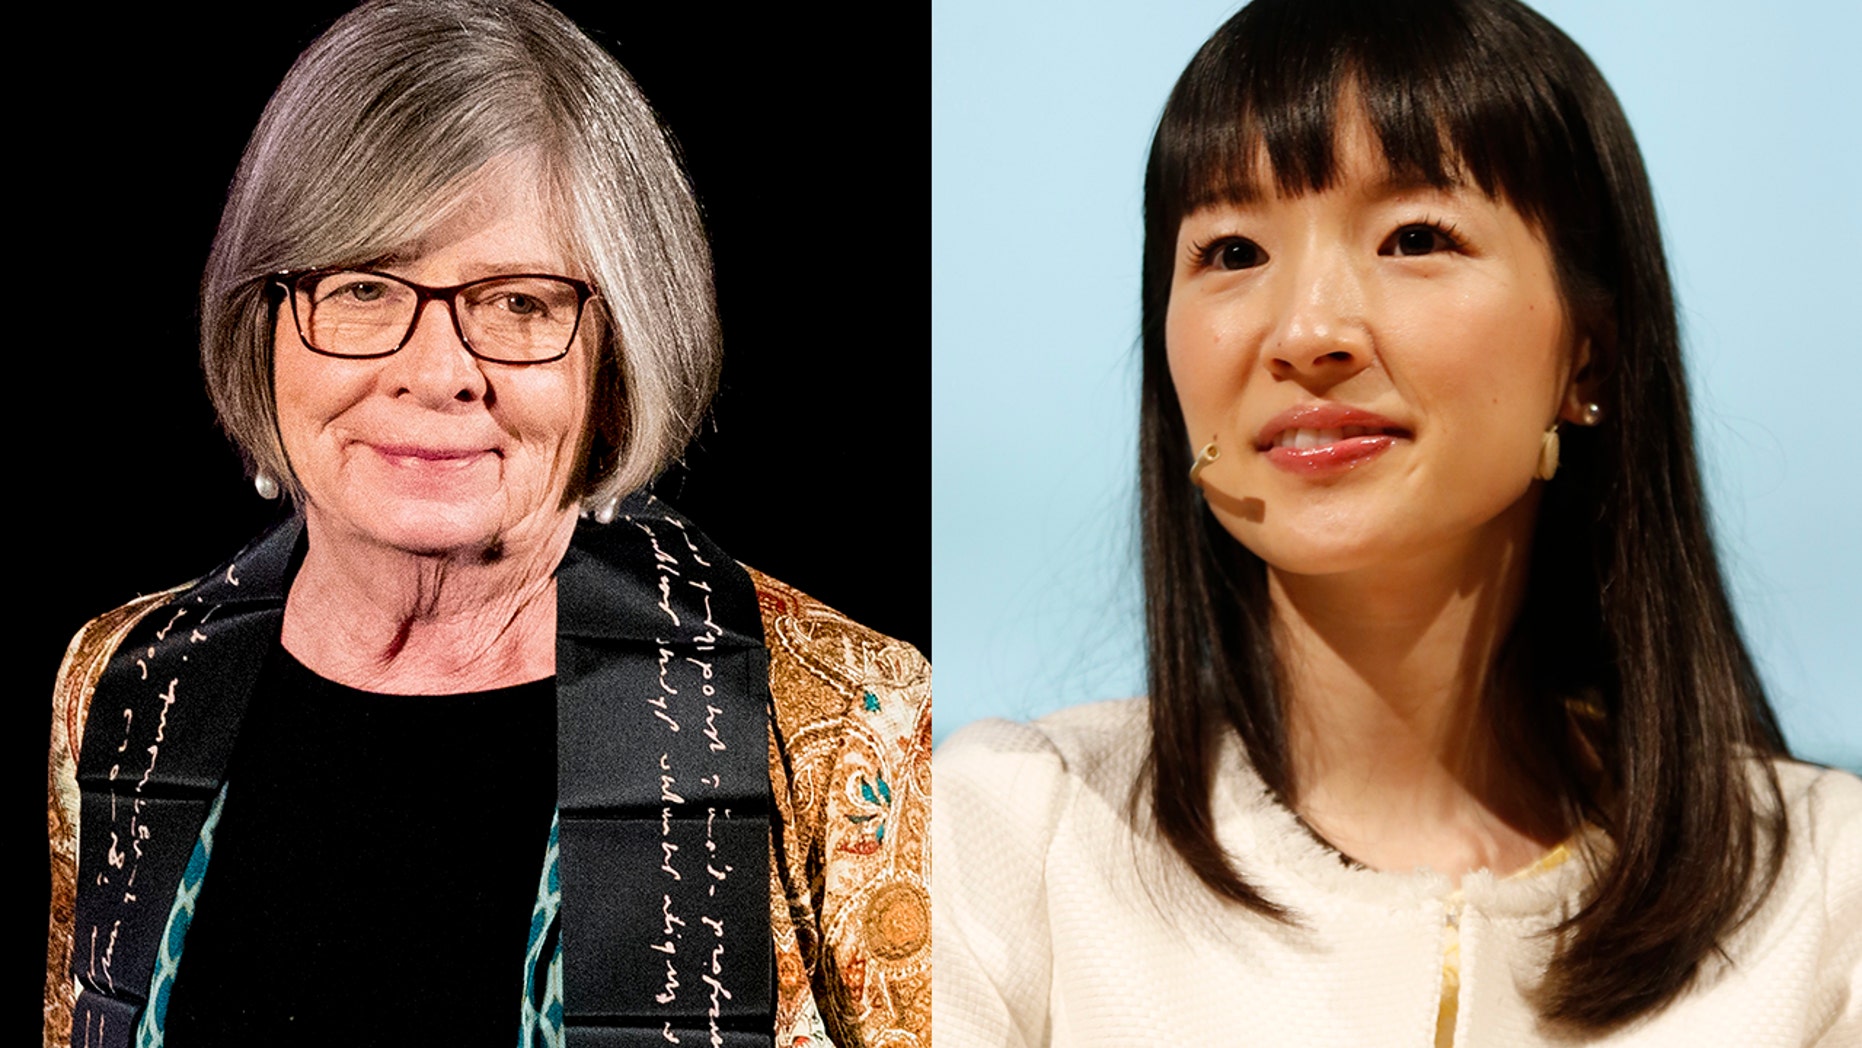 Prominent author faces backlash for ‘racist’ Marie Kondo tweets